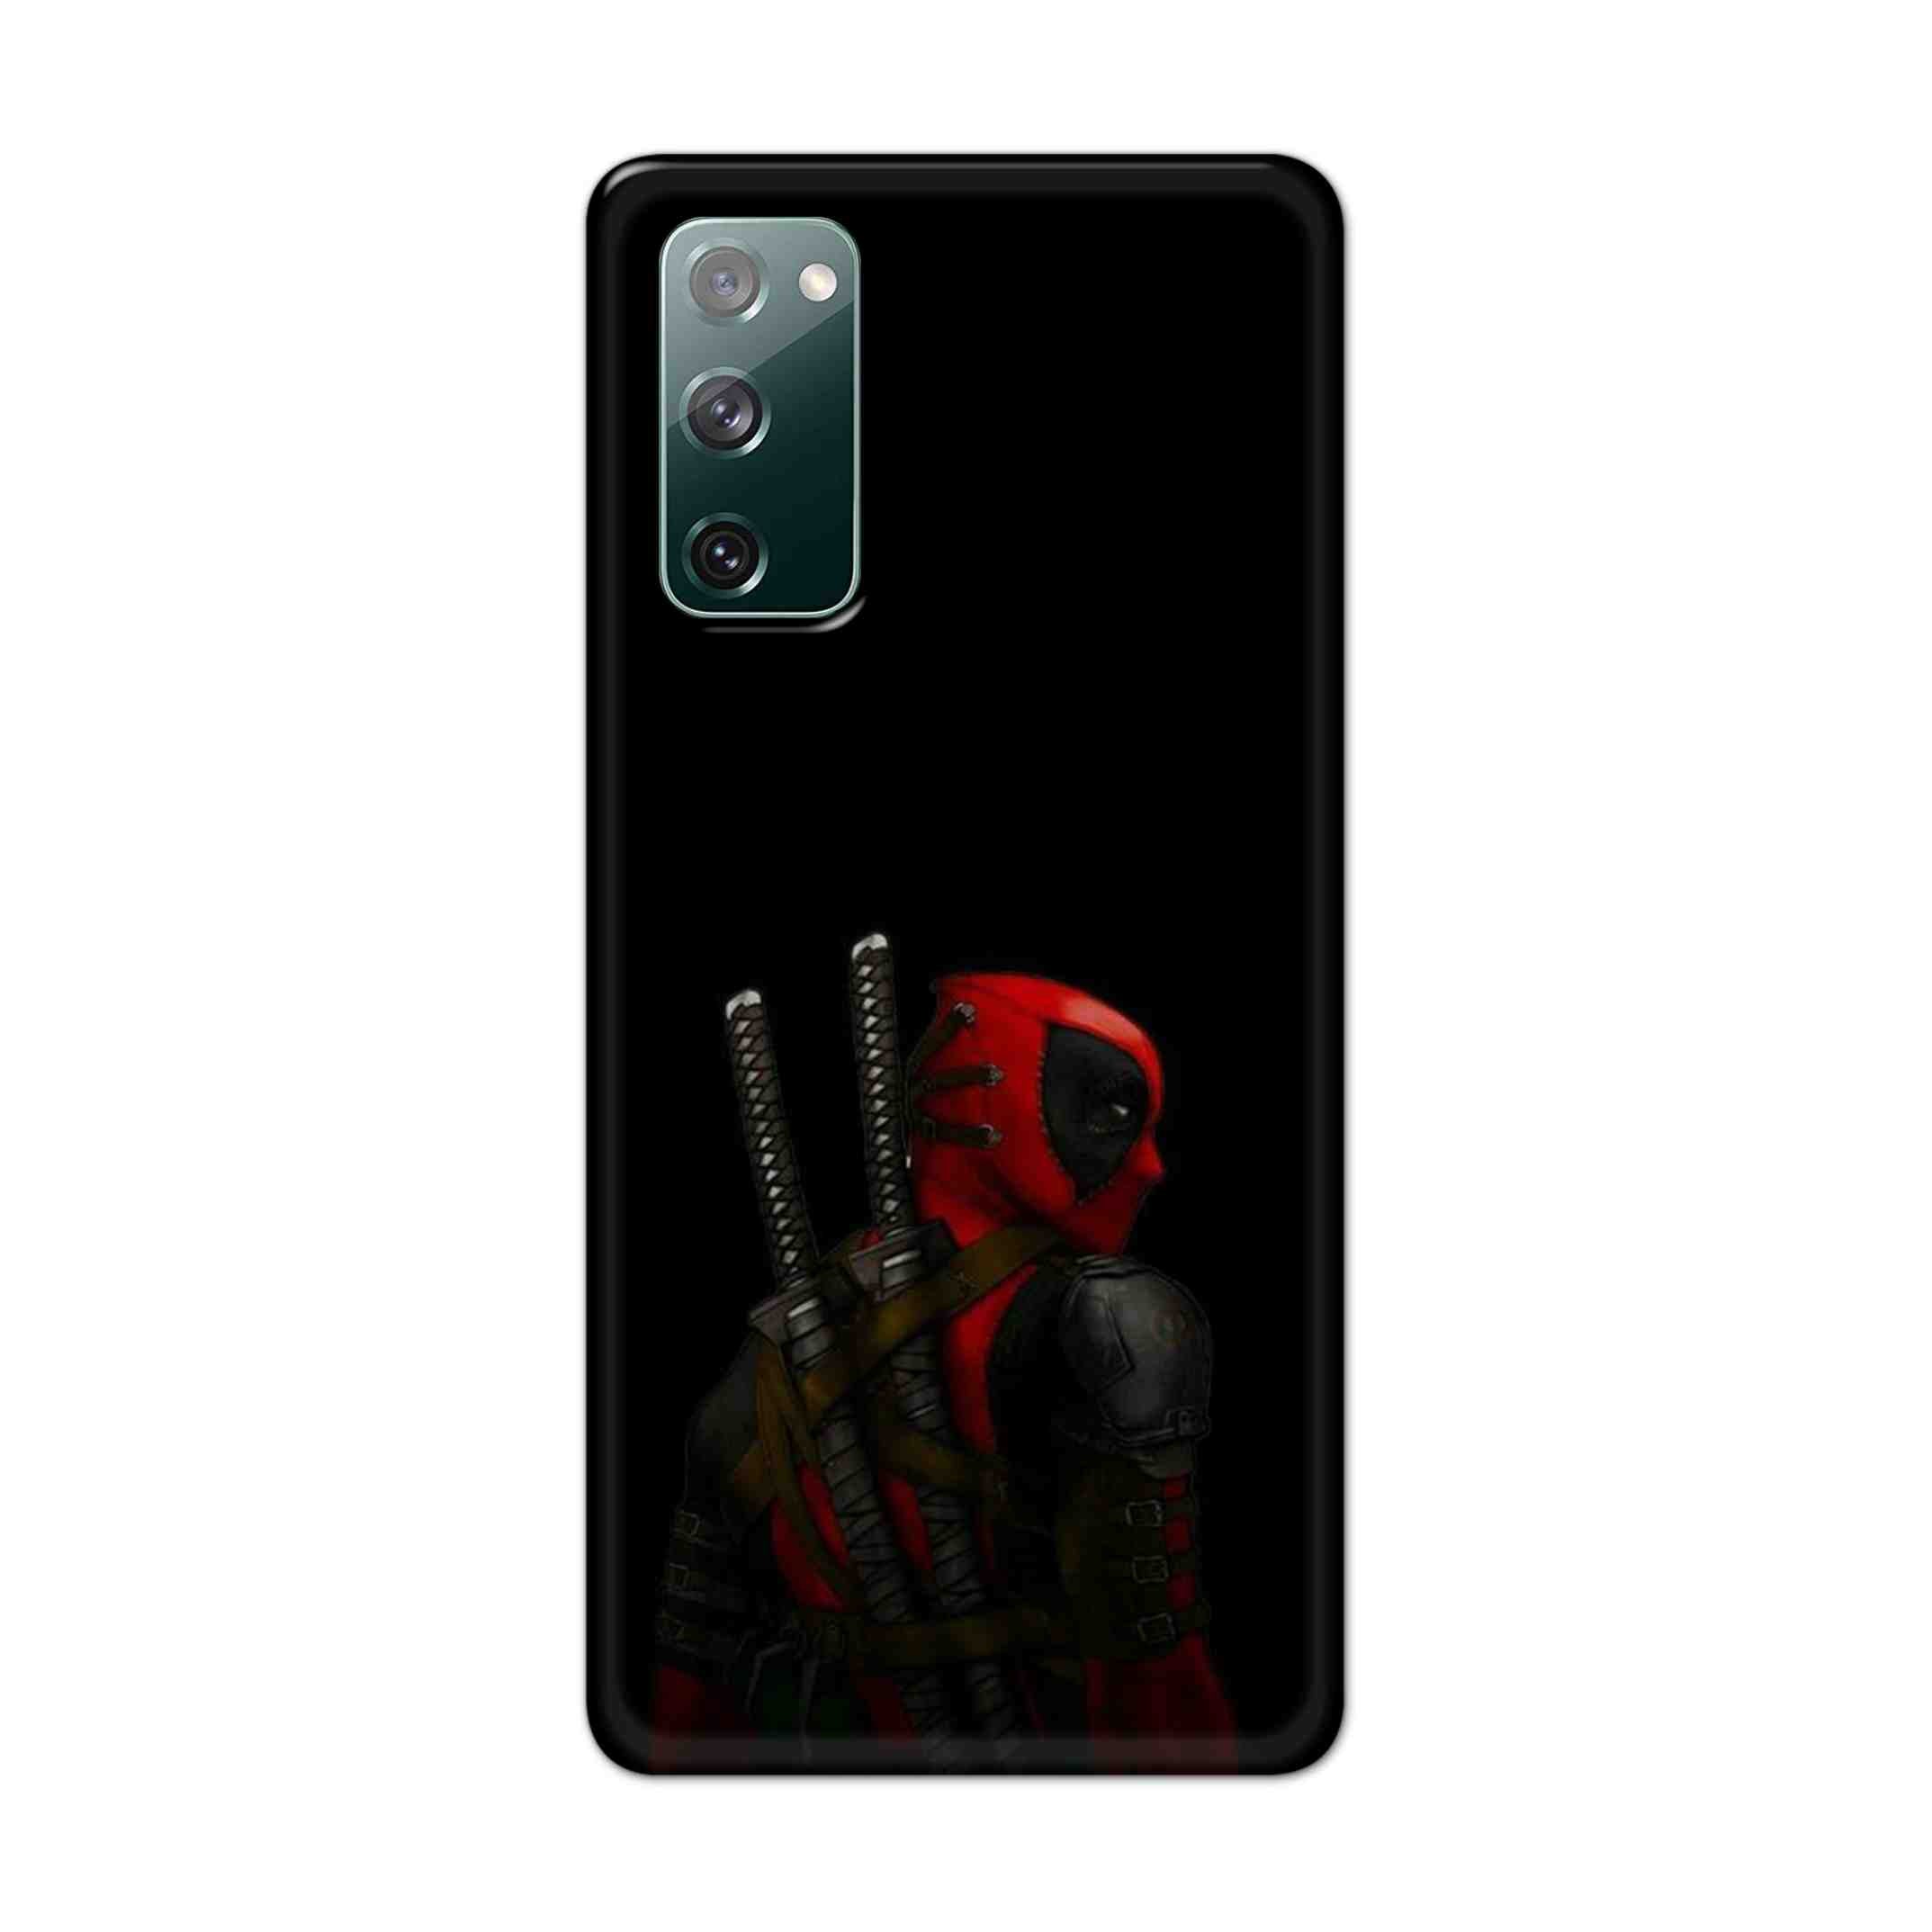 Buy Deadpool Hard Back Mobile Phone Case Cover For Samsung Galaxy S20 FE Online